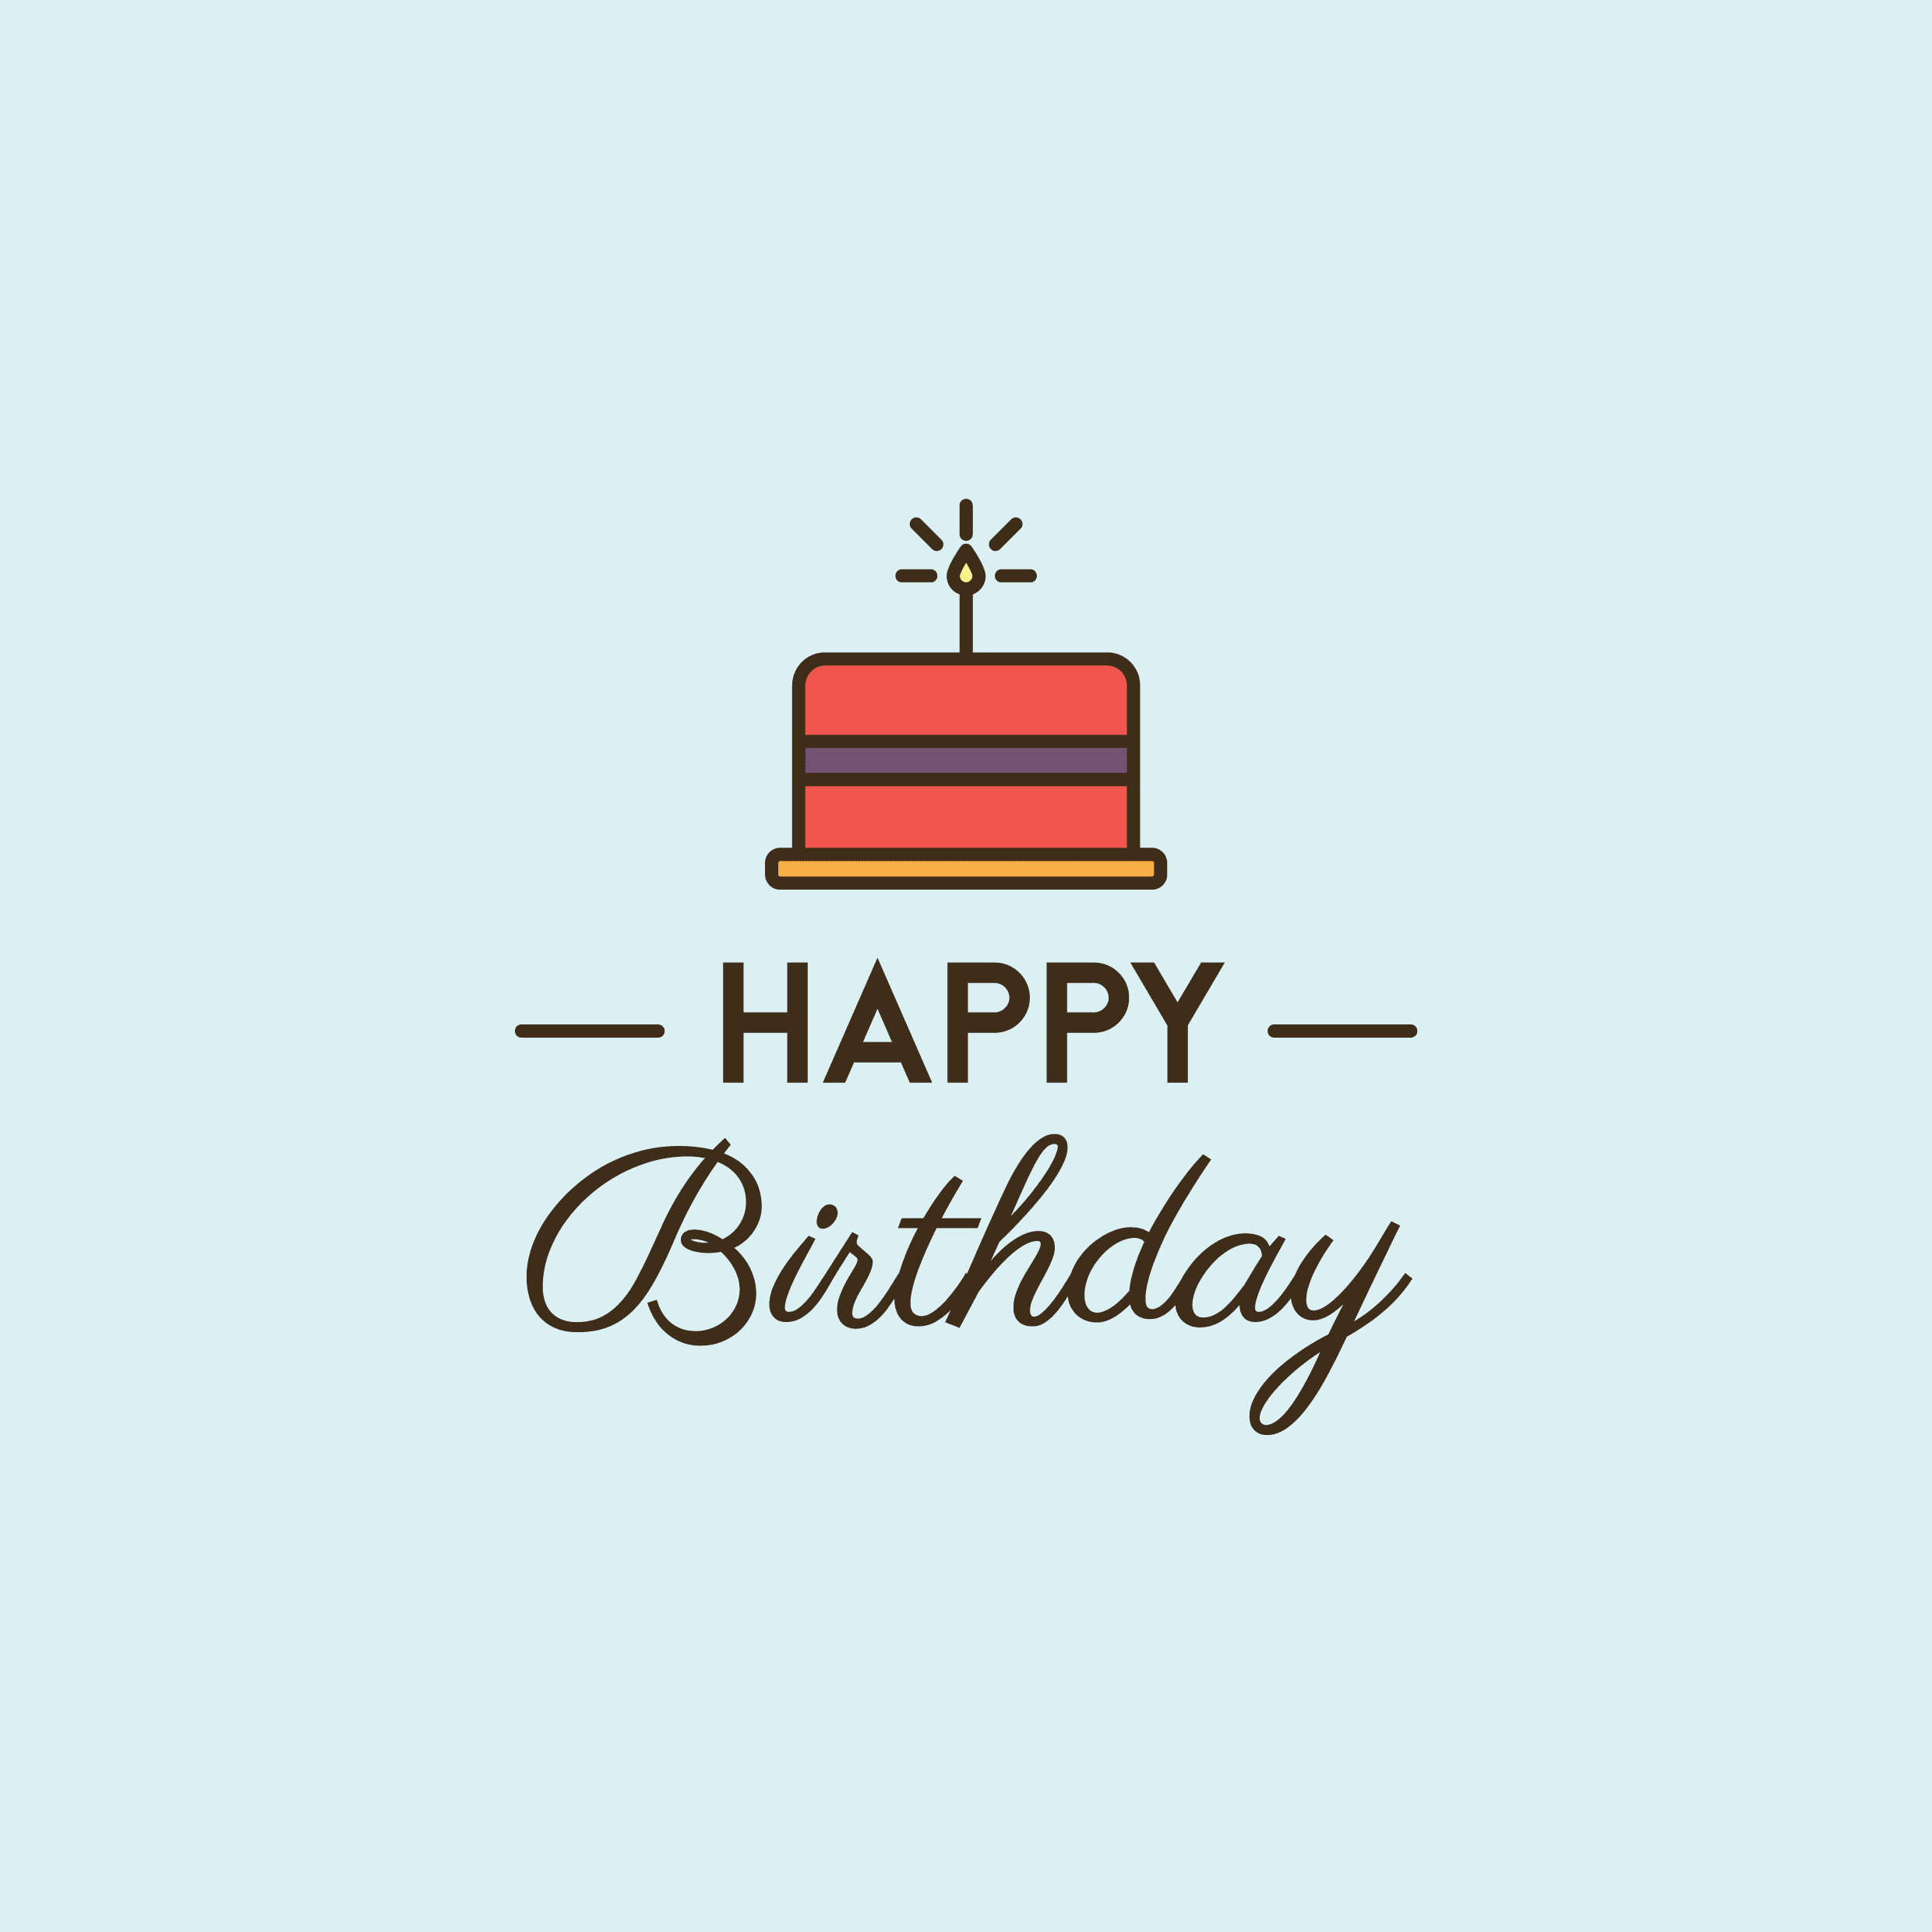 E Birthday Card
 25 Favorite Birthday E Cards and Sites for 2018